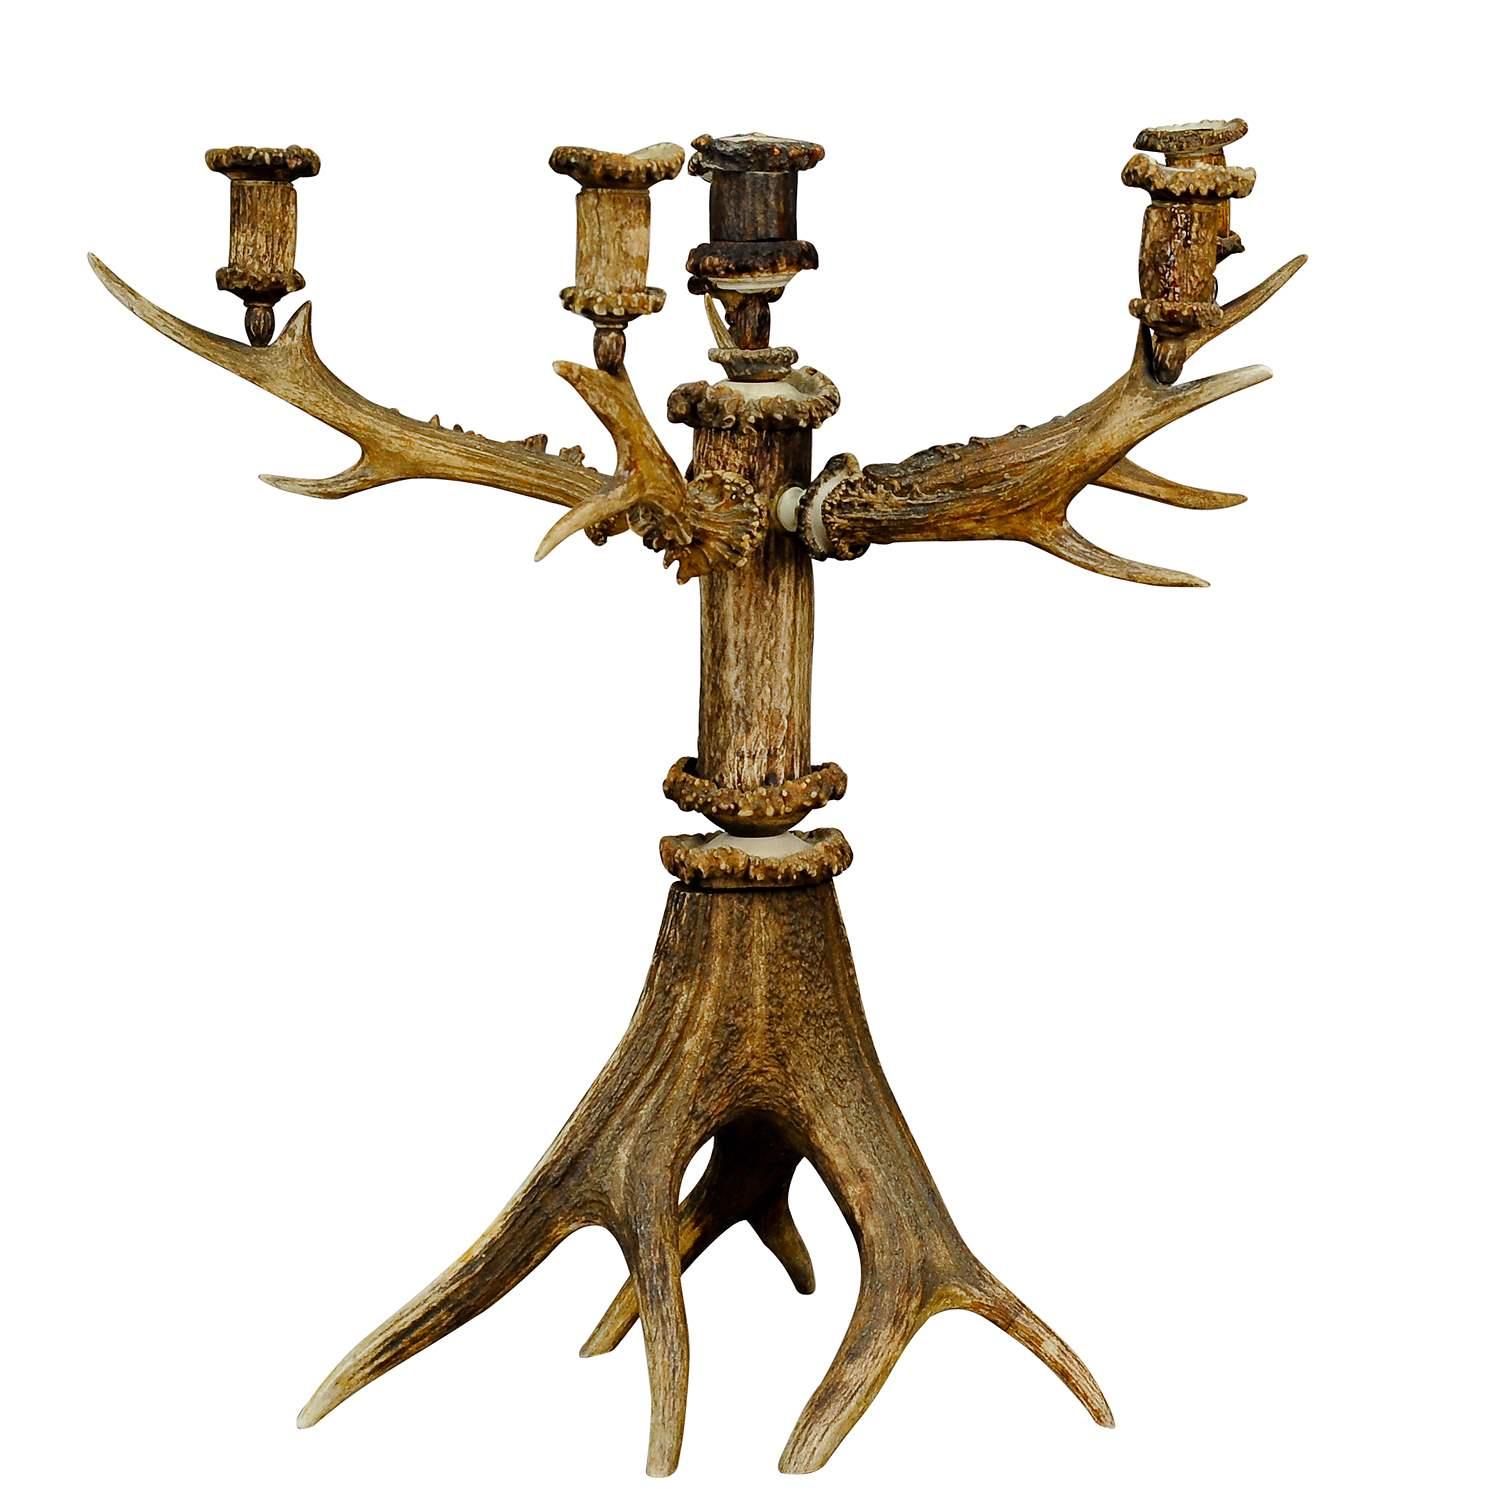 Large five armed cabin Decor Antler Candelabra 1880

A very rare and great five-armed rustic candelabra with six candle spouts. Made of original stag and deer antlers, spouts, turned antler rouses and carved decorations. It was manufactured in